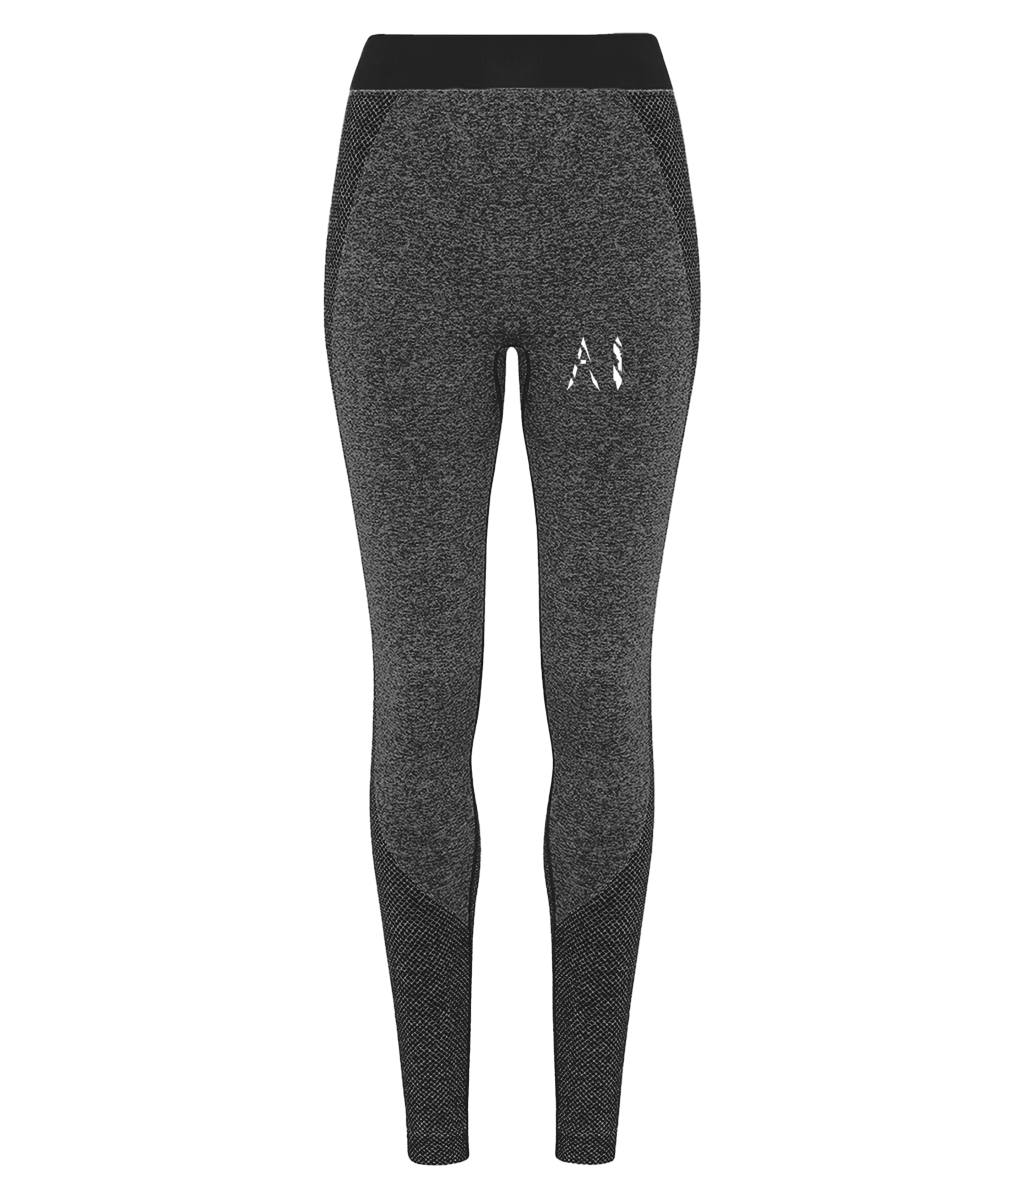 Womens black Athletic Seamless Sports Leggings with white AI logo on upper thigh